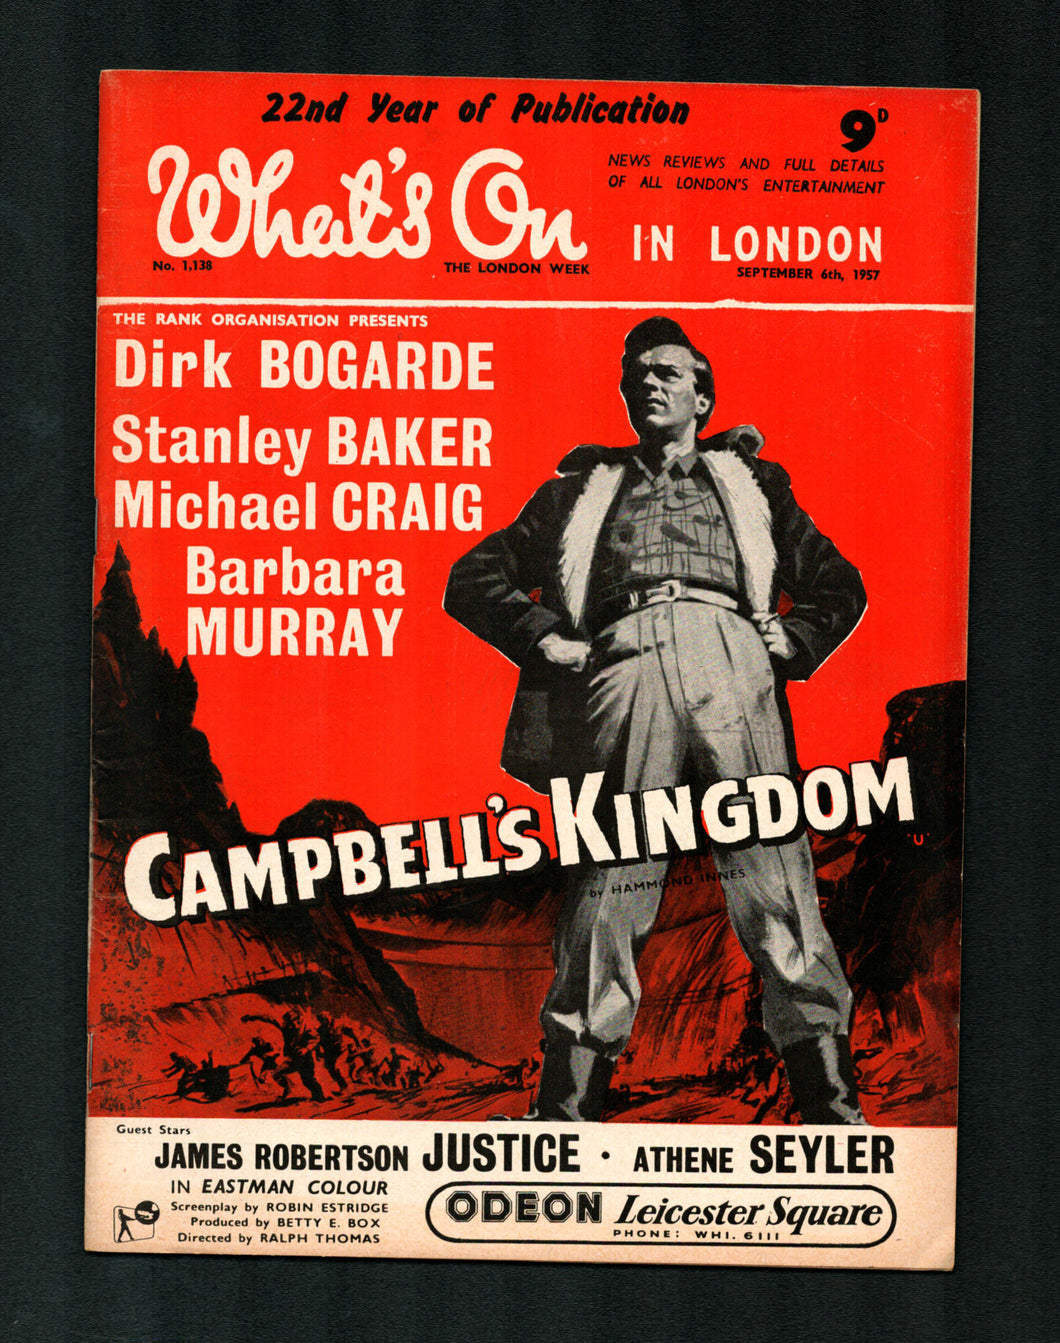 Whats on in London No 1138 Sept 6 1957